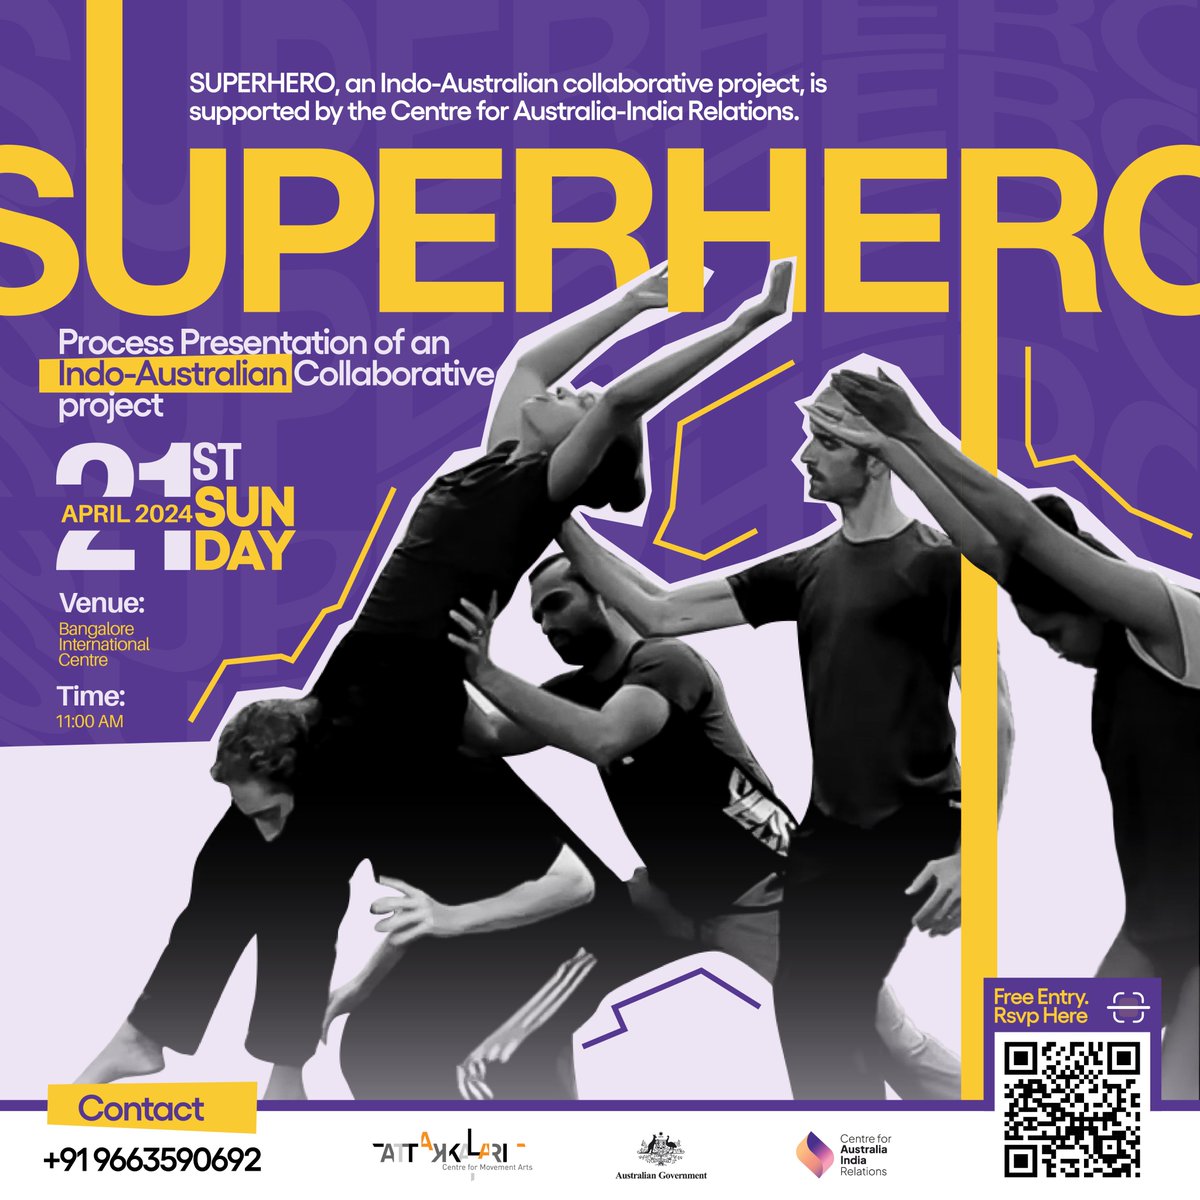 Great opportunity to meet the creative team behind Indo-Australian dance collaboration project 'Superhero' at @bicblr. Superhero is a partnership between acclaimed 🇦🇺 choreographer Raghav Handa & Bengaluru's @attakkalari, supported by a @AusIndiaCentre grant. RSVP details 👇